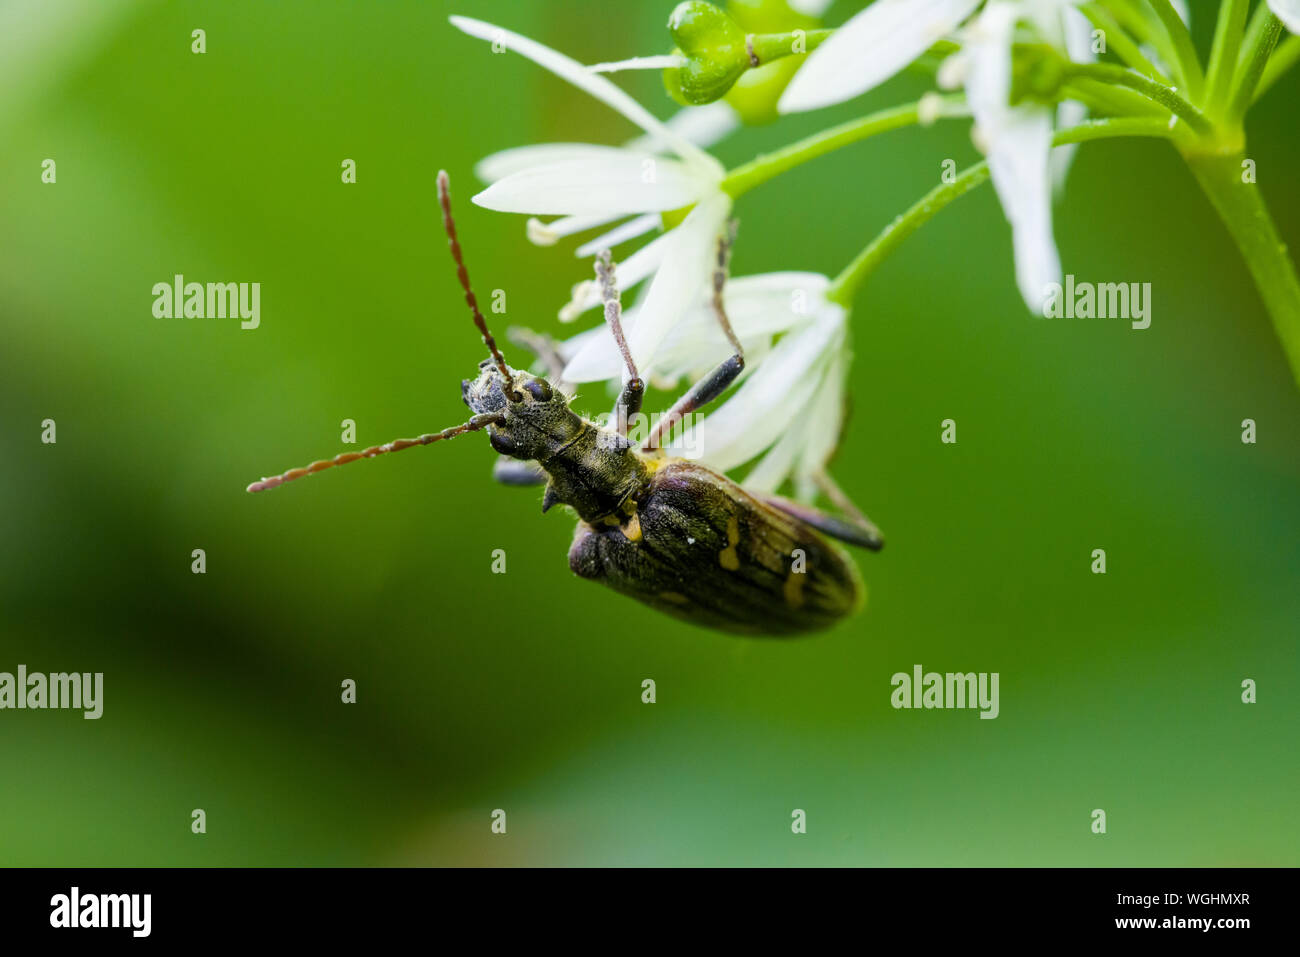 A Two-banded Longhorn Beetle (Rhagium bifasciatum) on a Ransom Flower in Long Wood in the Mendip Hills, Somerset, England. Stock Photo